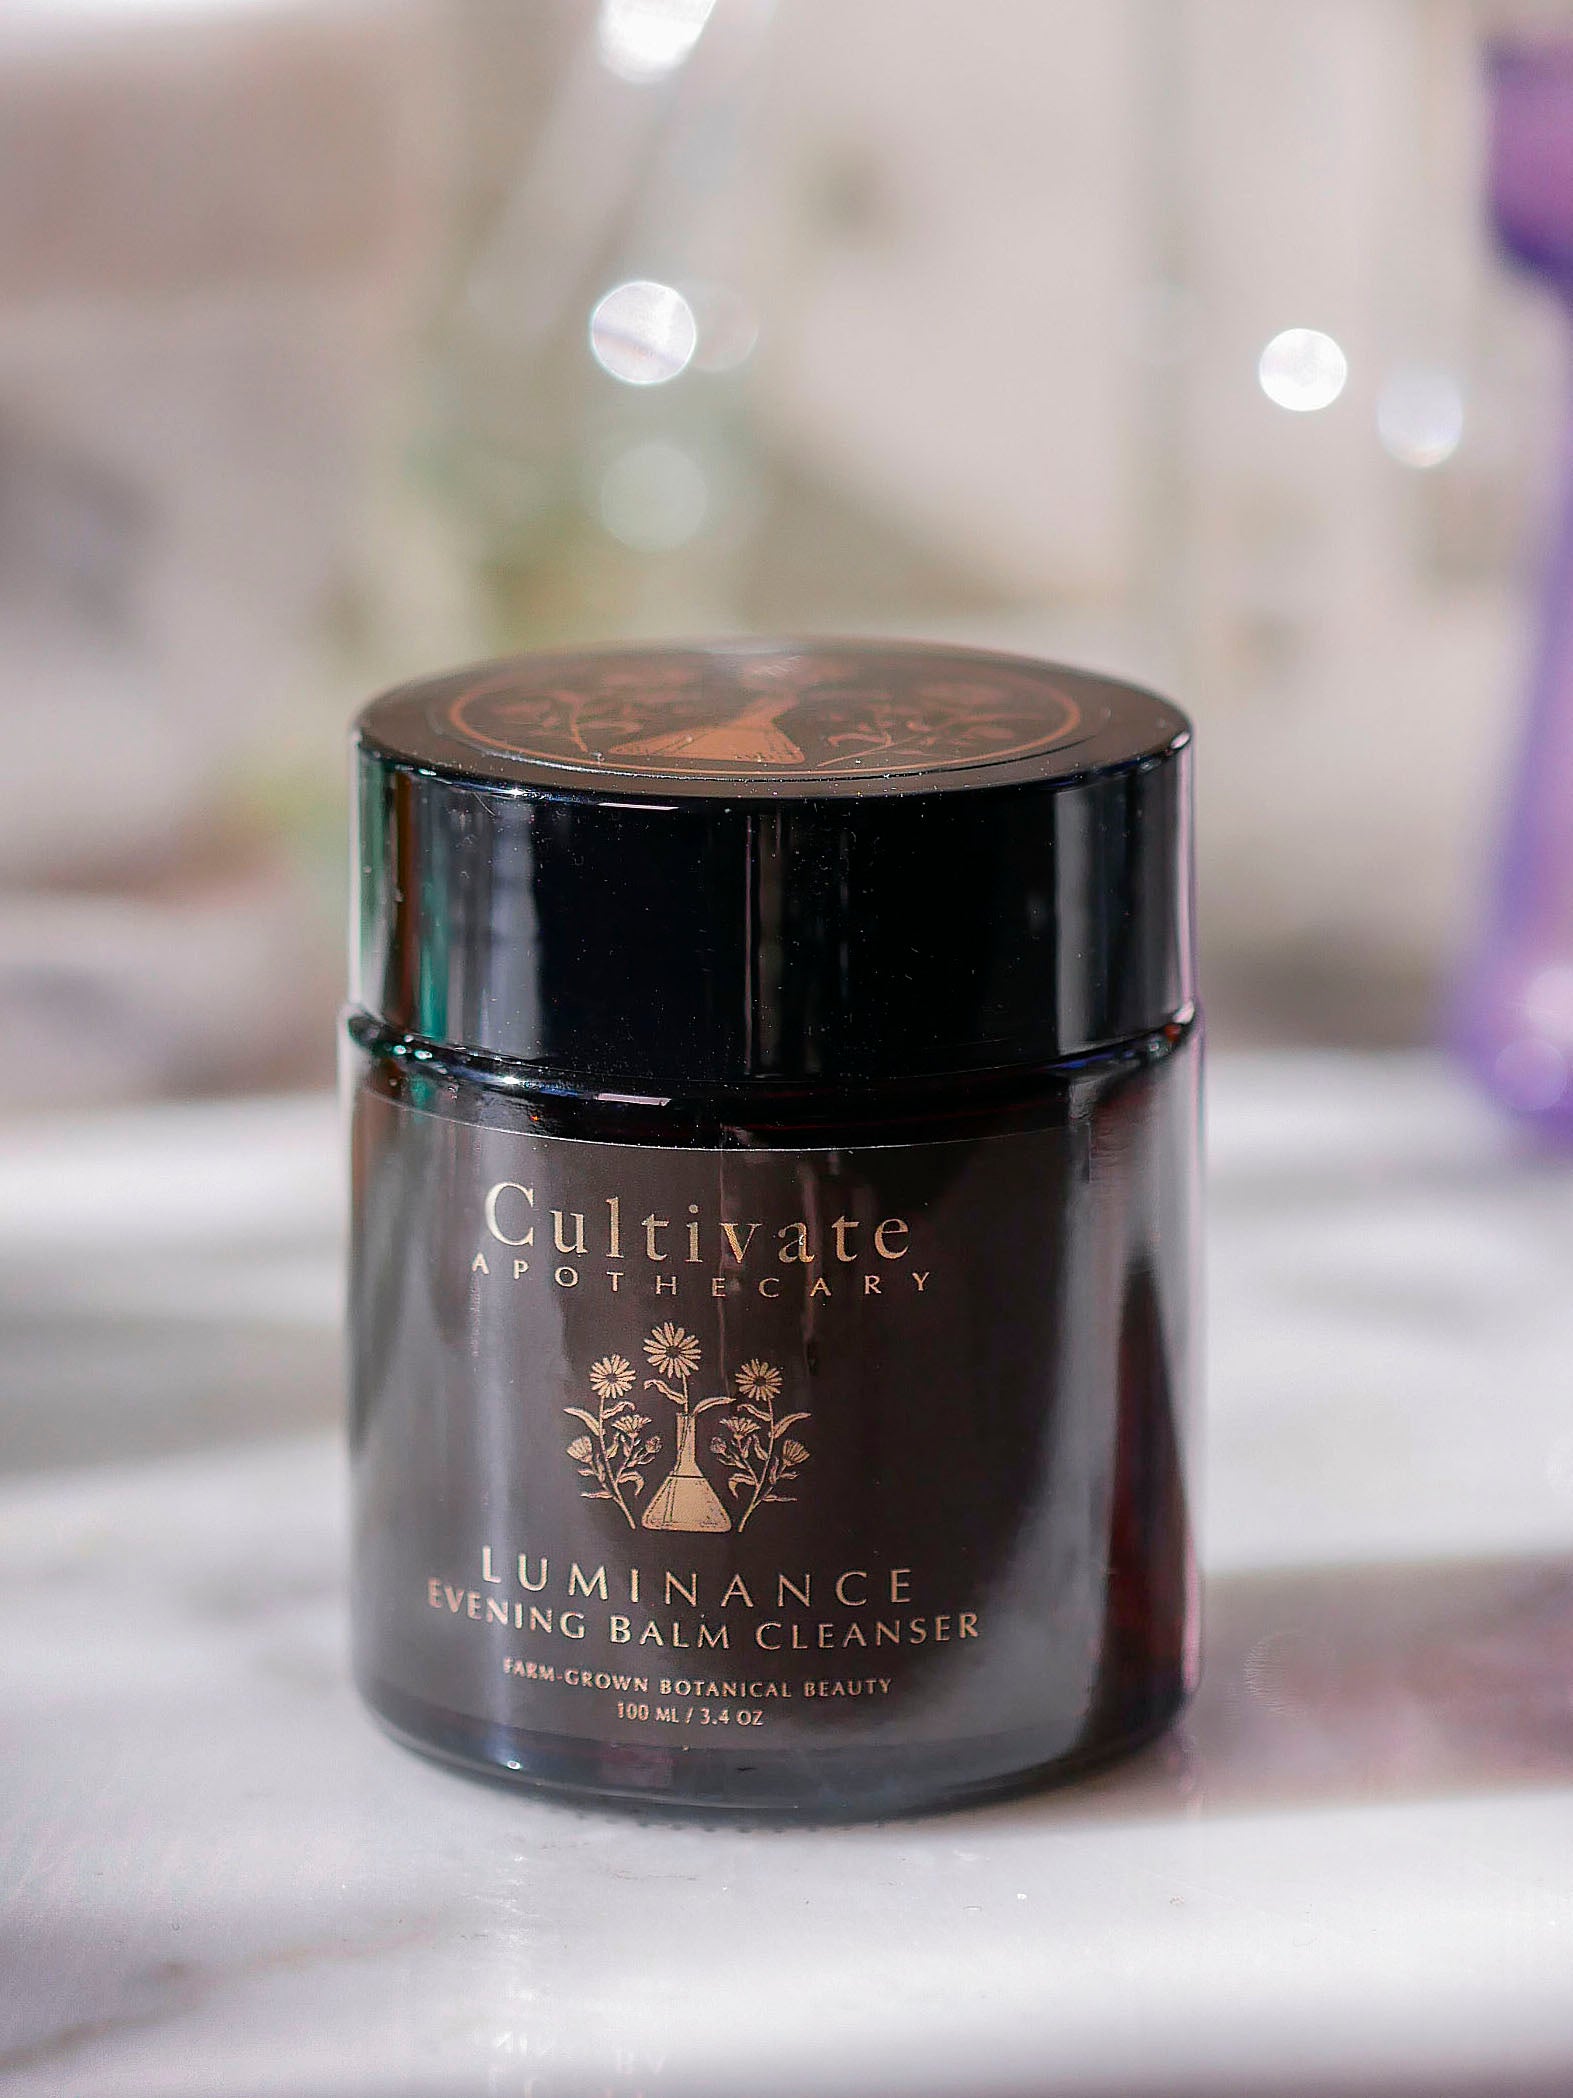 Luminance evening balm cleanser by Cultivate Apothecary.